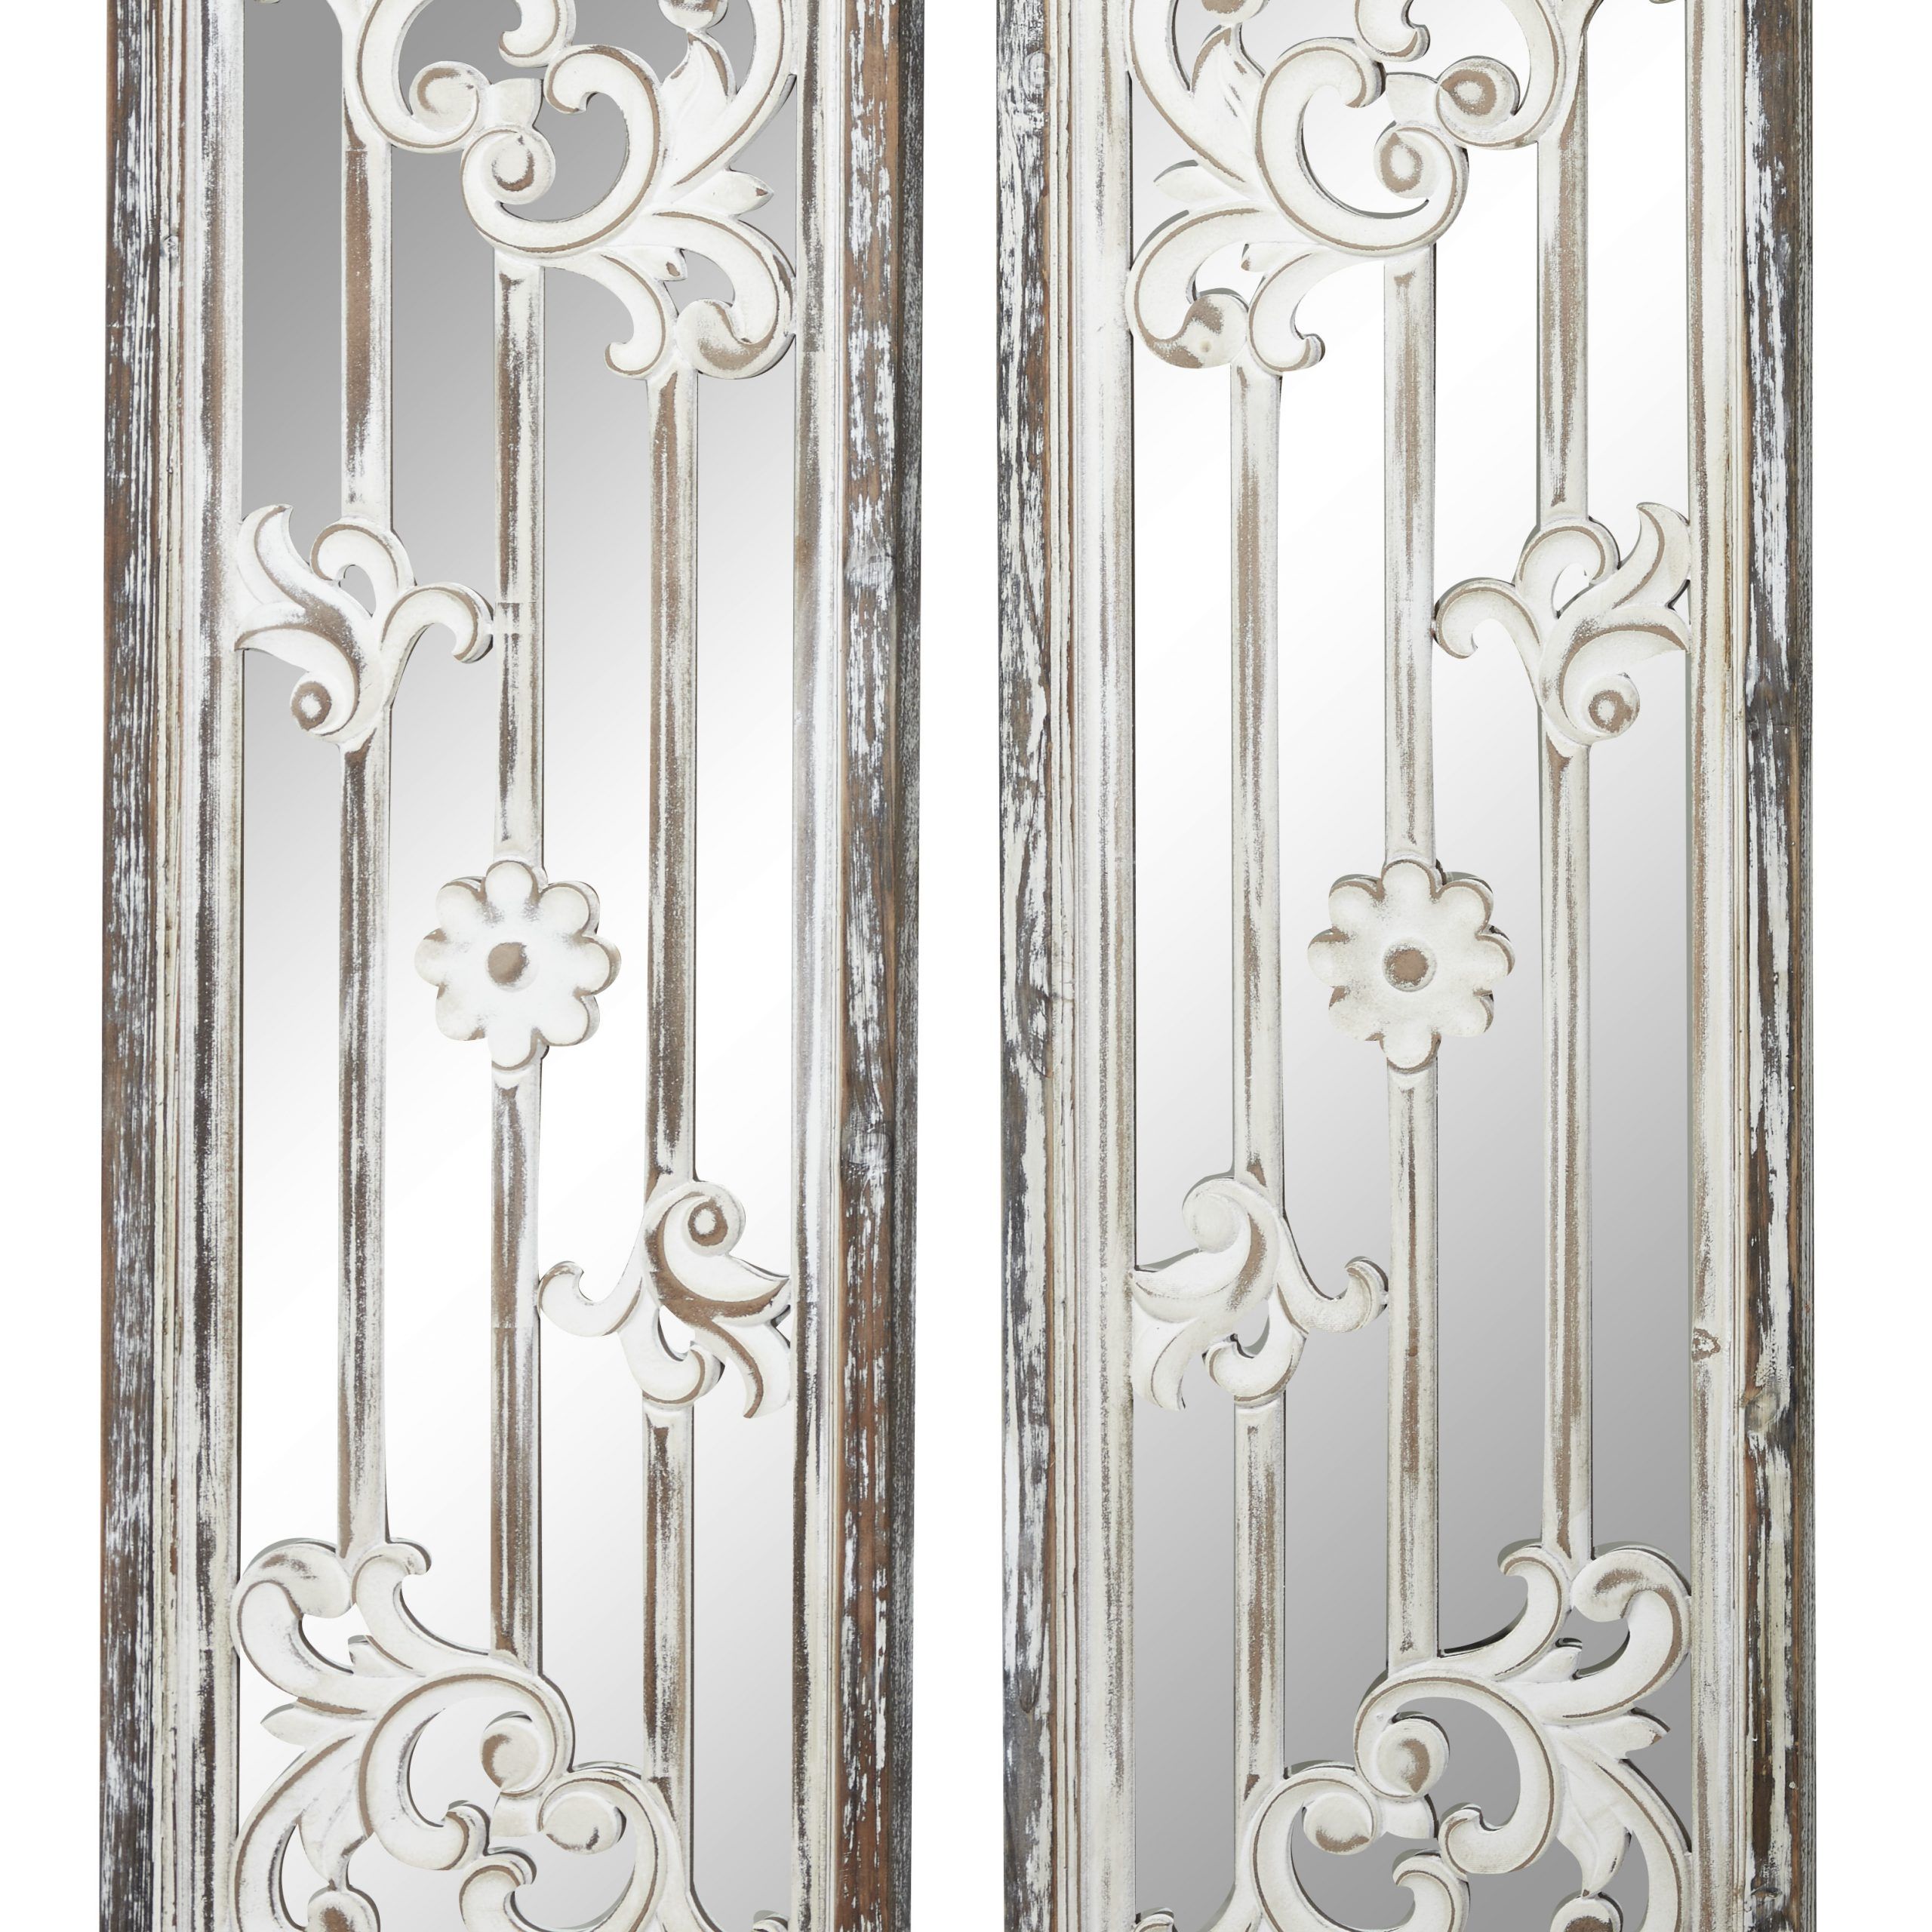 Preferred White Wood Wall Mirrors Throughout Decmode – Vintage Rectangular Wall Mirrors W/ Decorative Distressed (View 15 of 15)